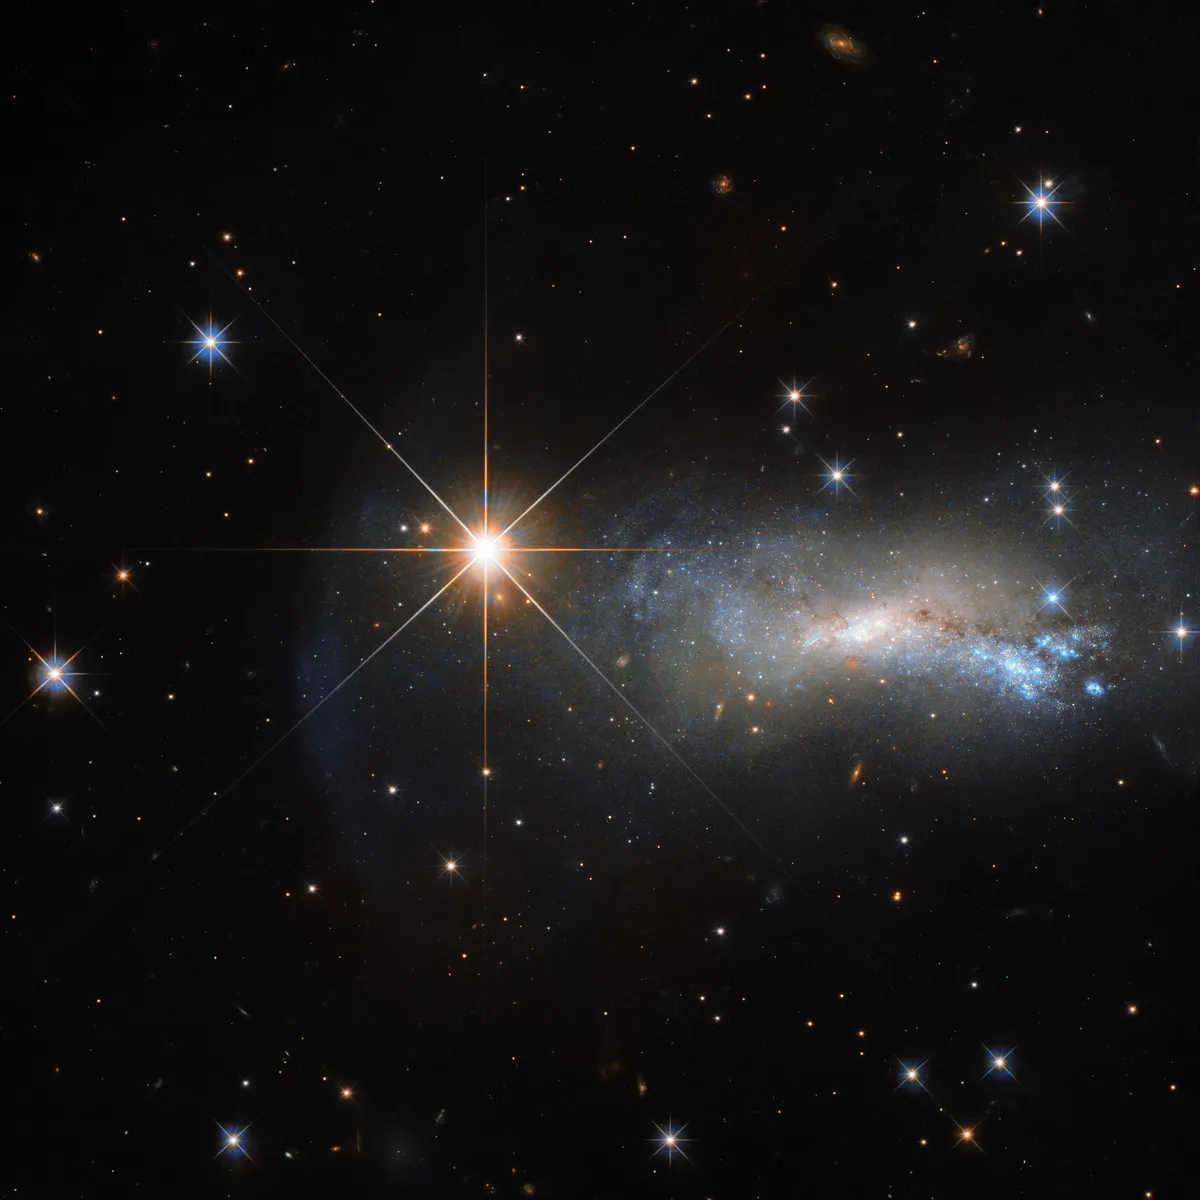 A Hubble Space Telescope image showing a galaxy NGC 7250. The bright object in the foreground is star TYC 3203-450-1.